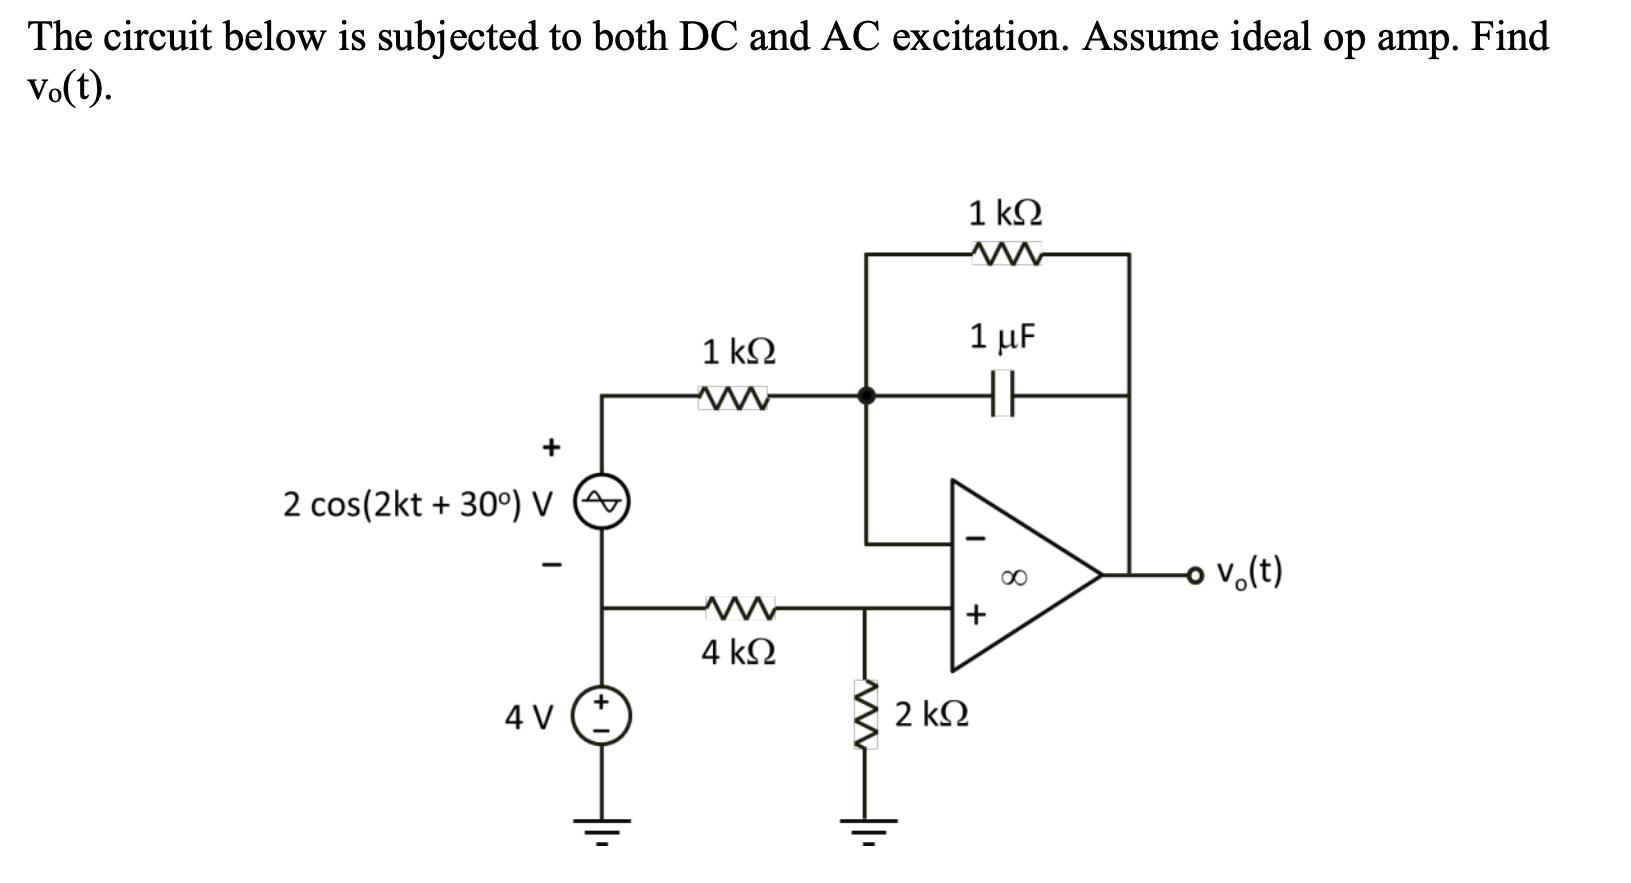 The circuit below is subjected to both DC and AC excitation. Assume ideal op amp. Find Vo(t). + 2 cos(2kt +